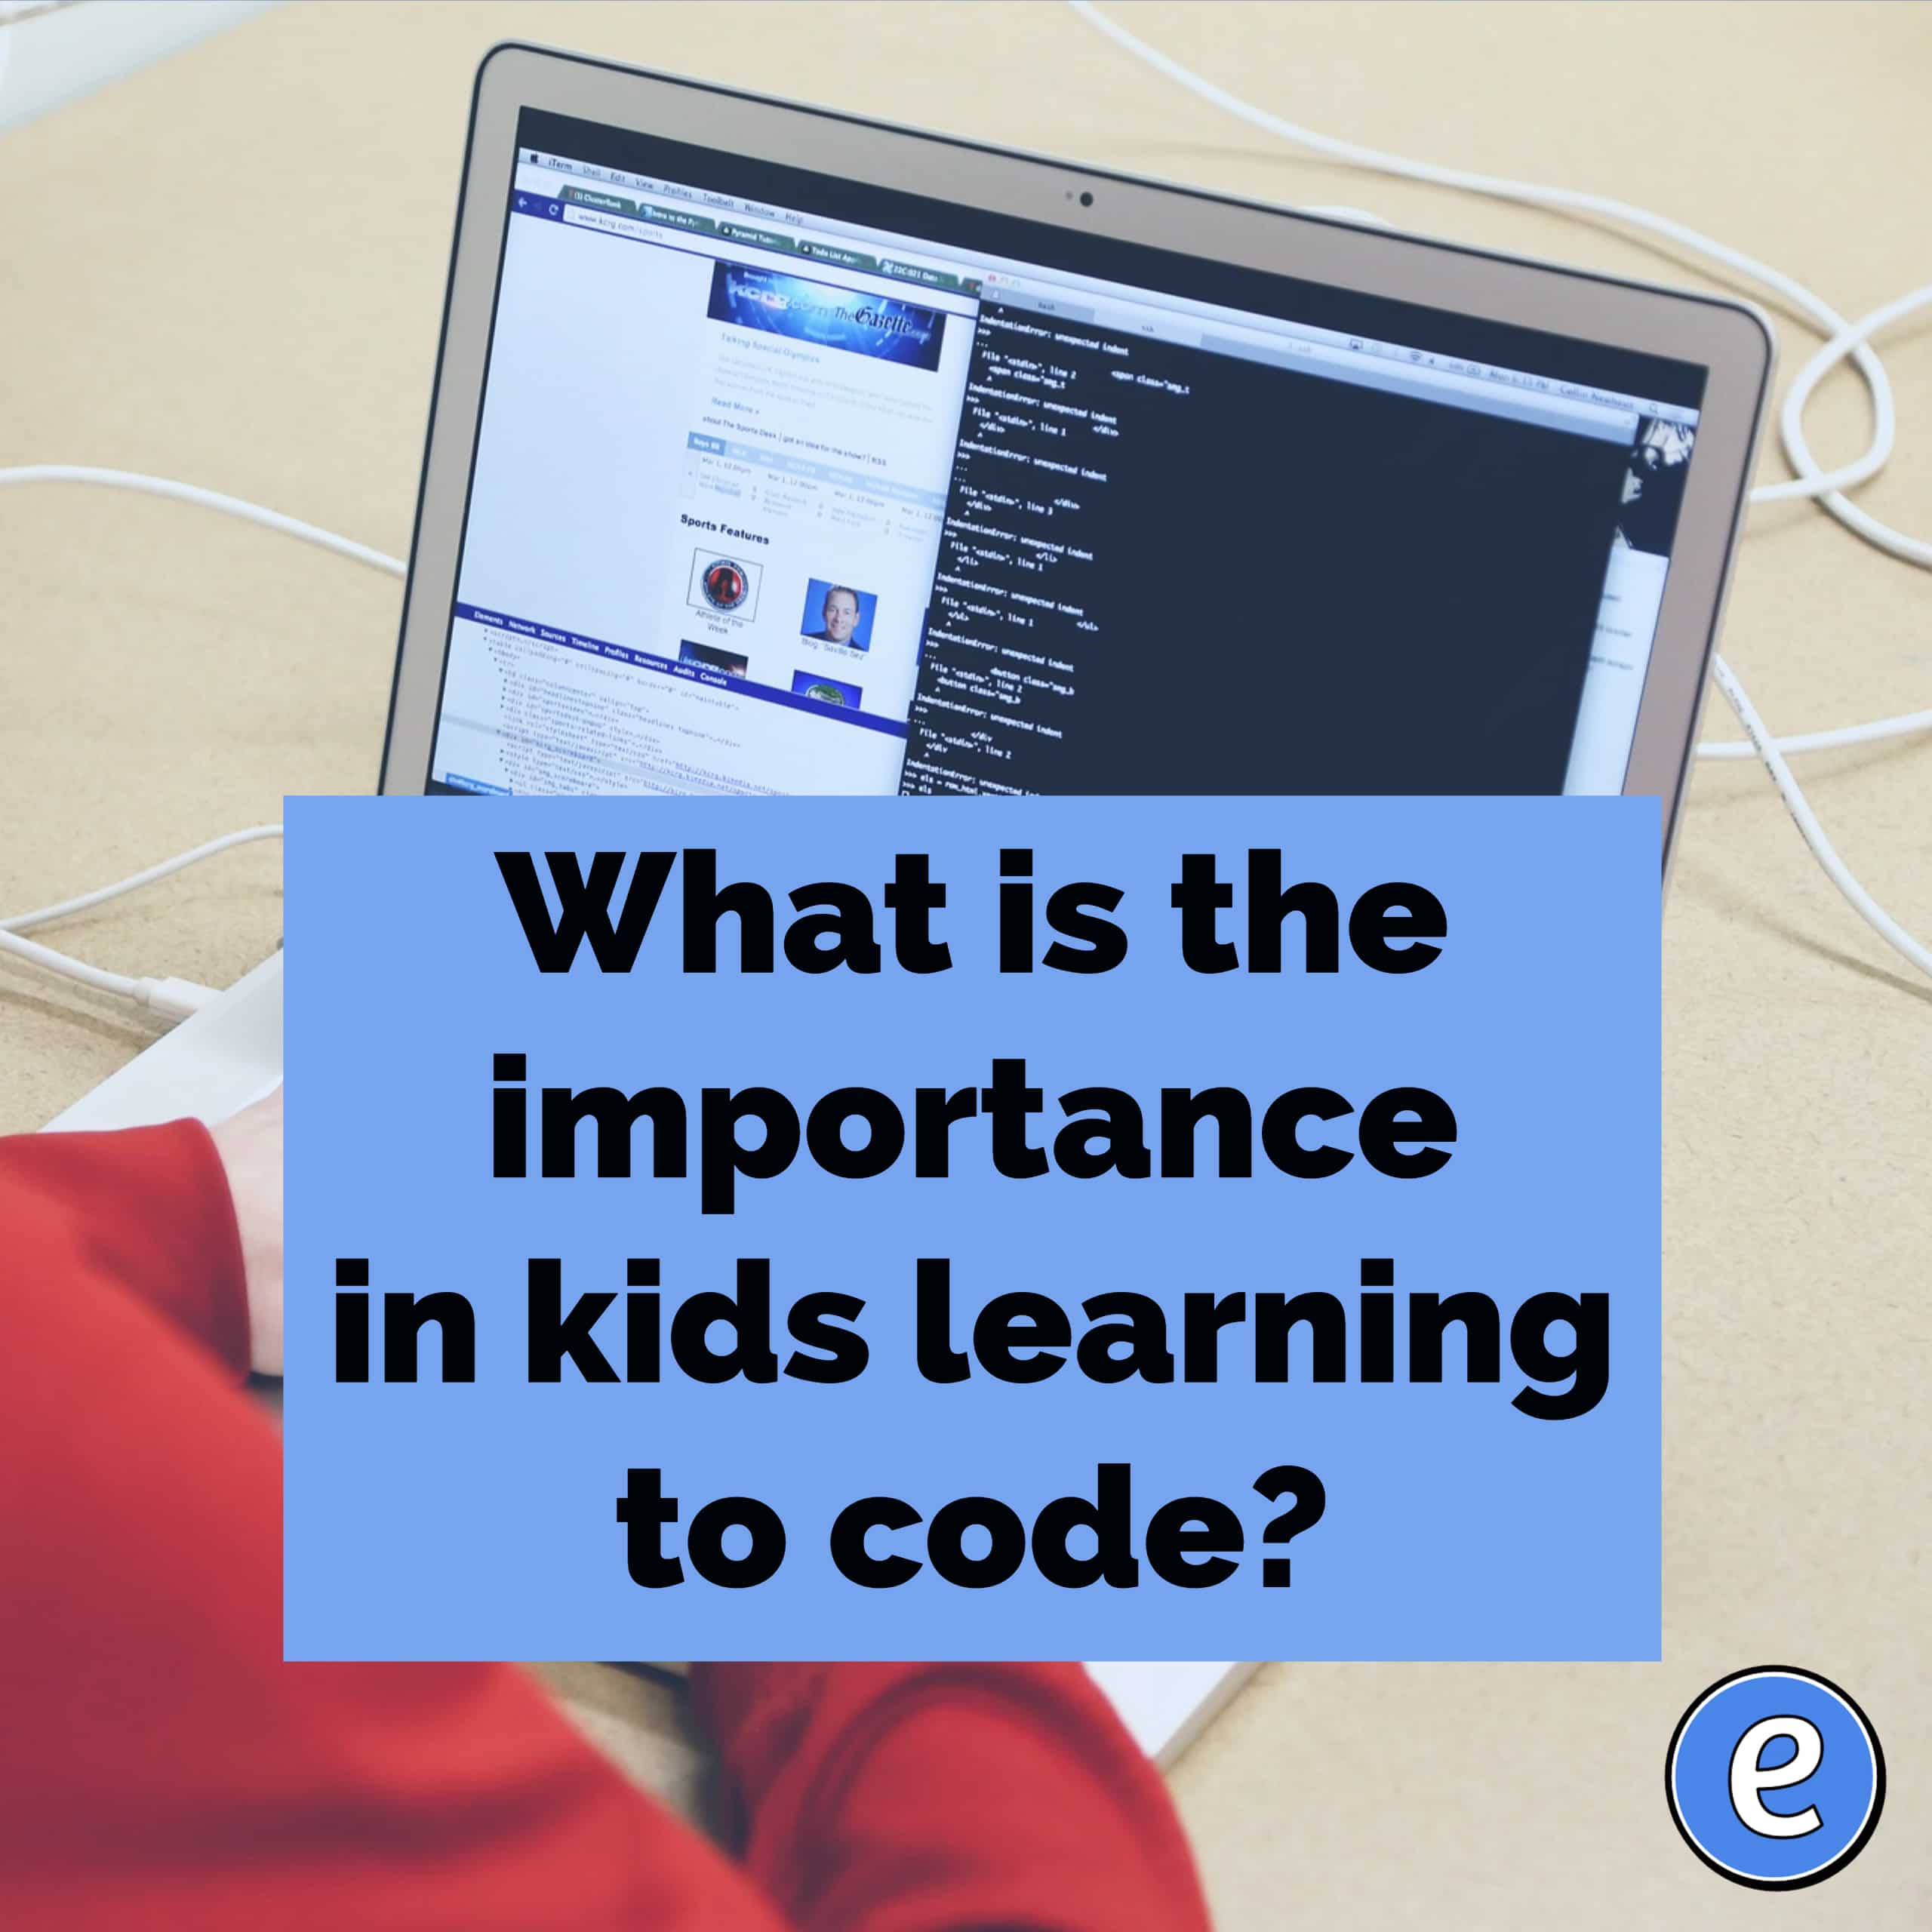 What is the importance in kids learning to code?